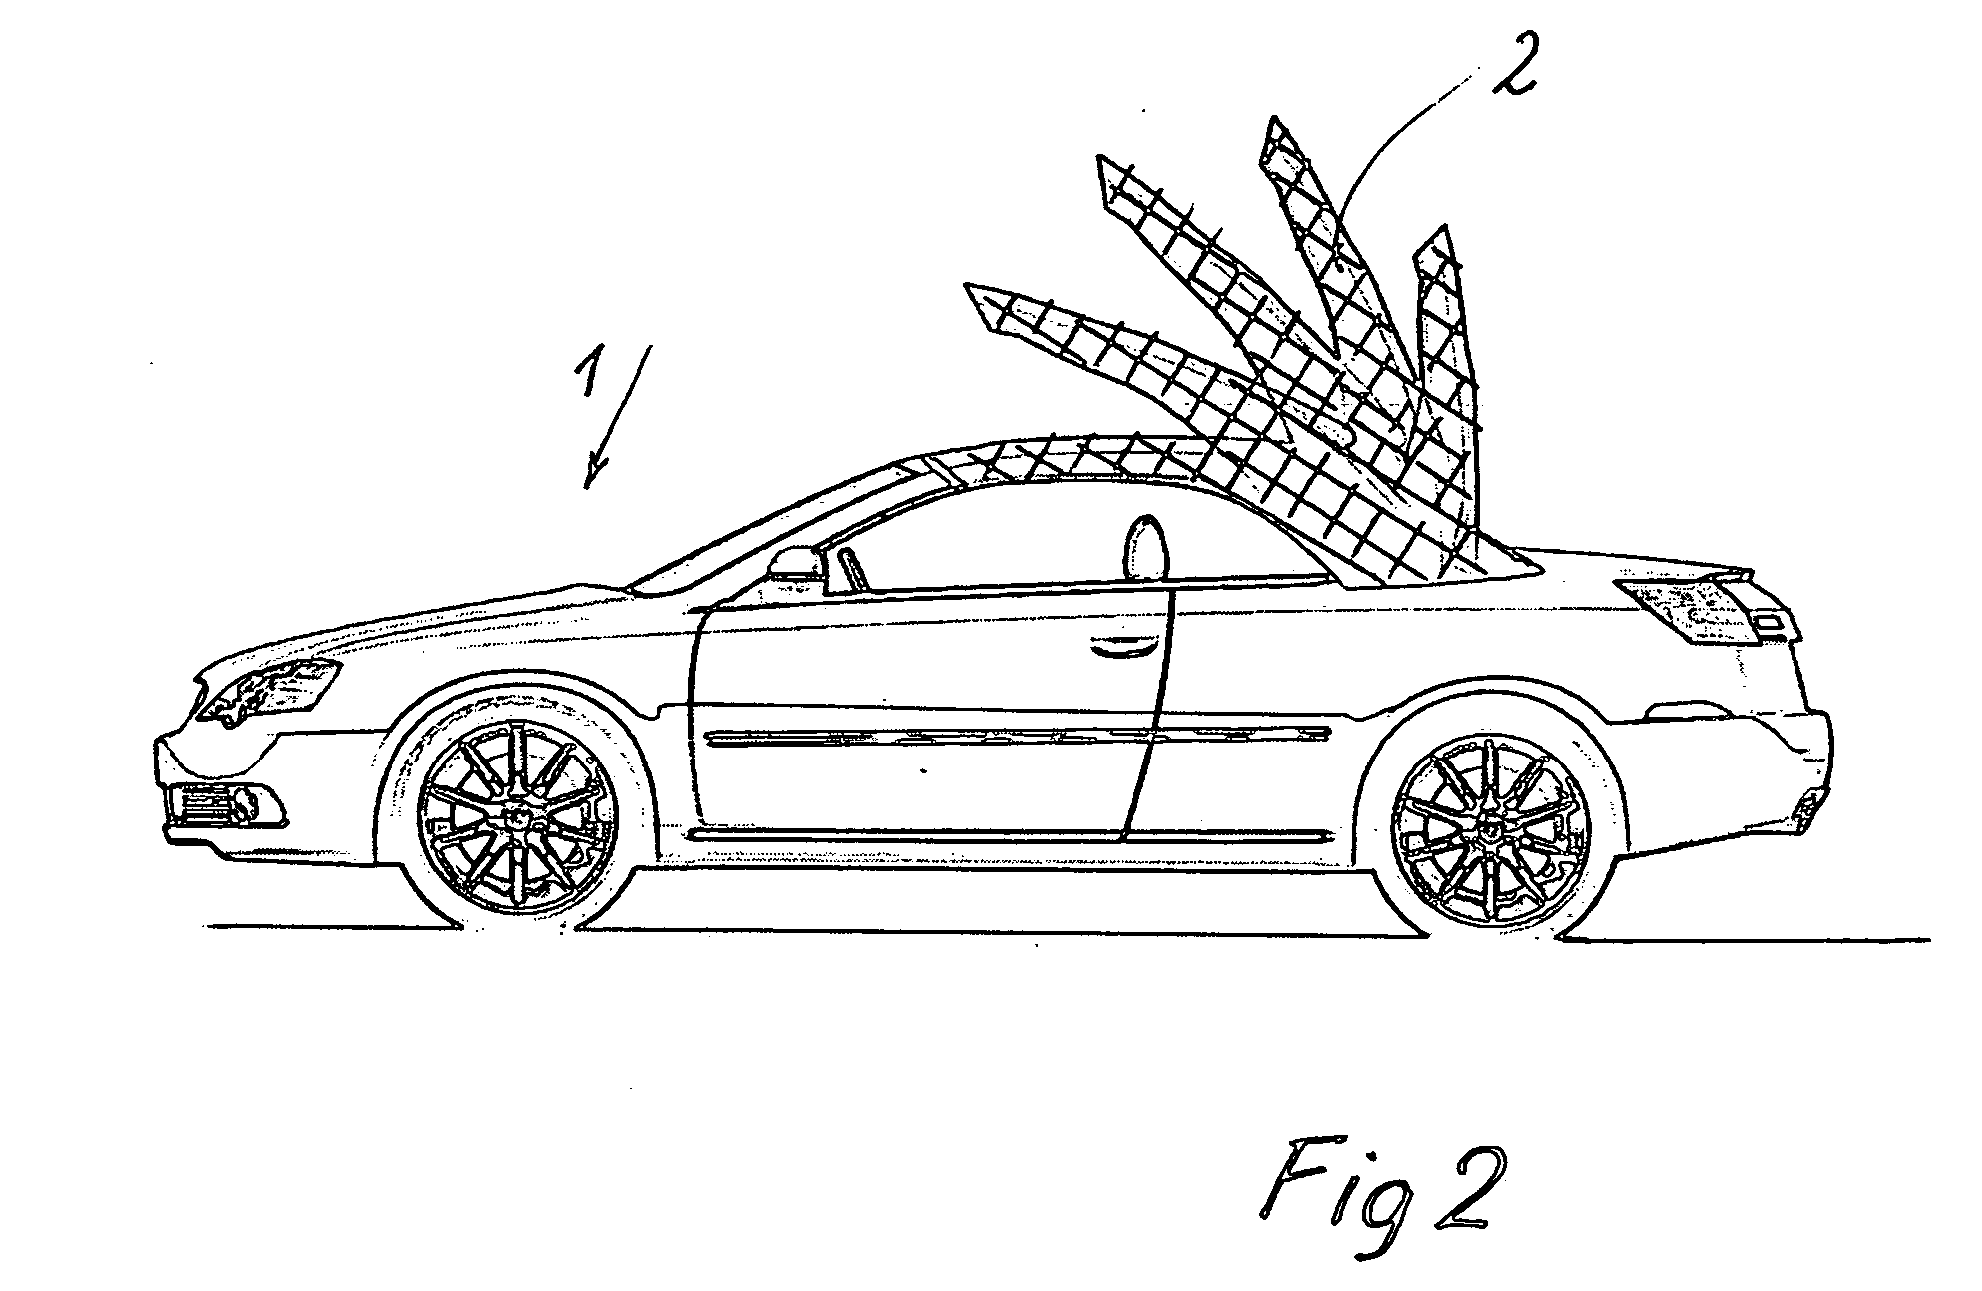 Pneumatically inflatable structural element for automotive vehicles